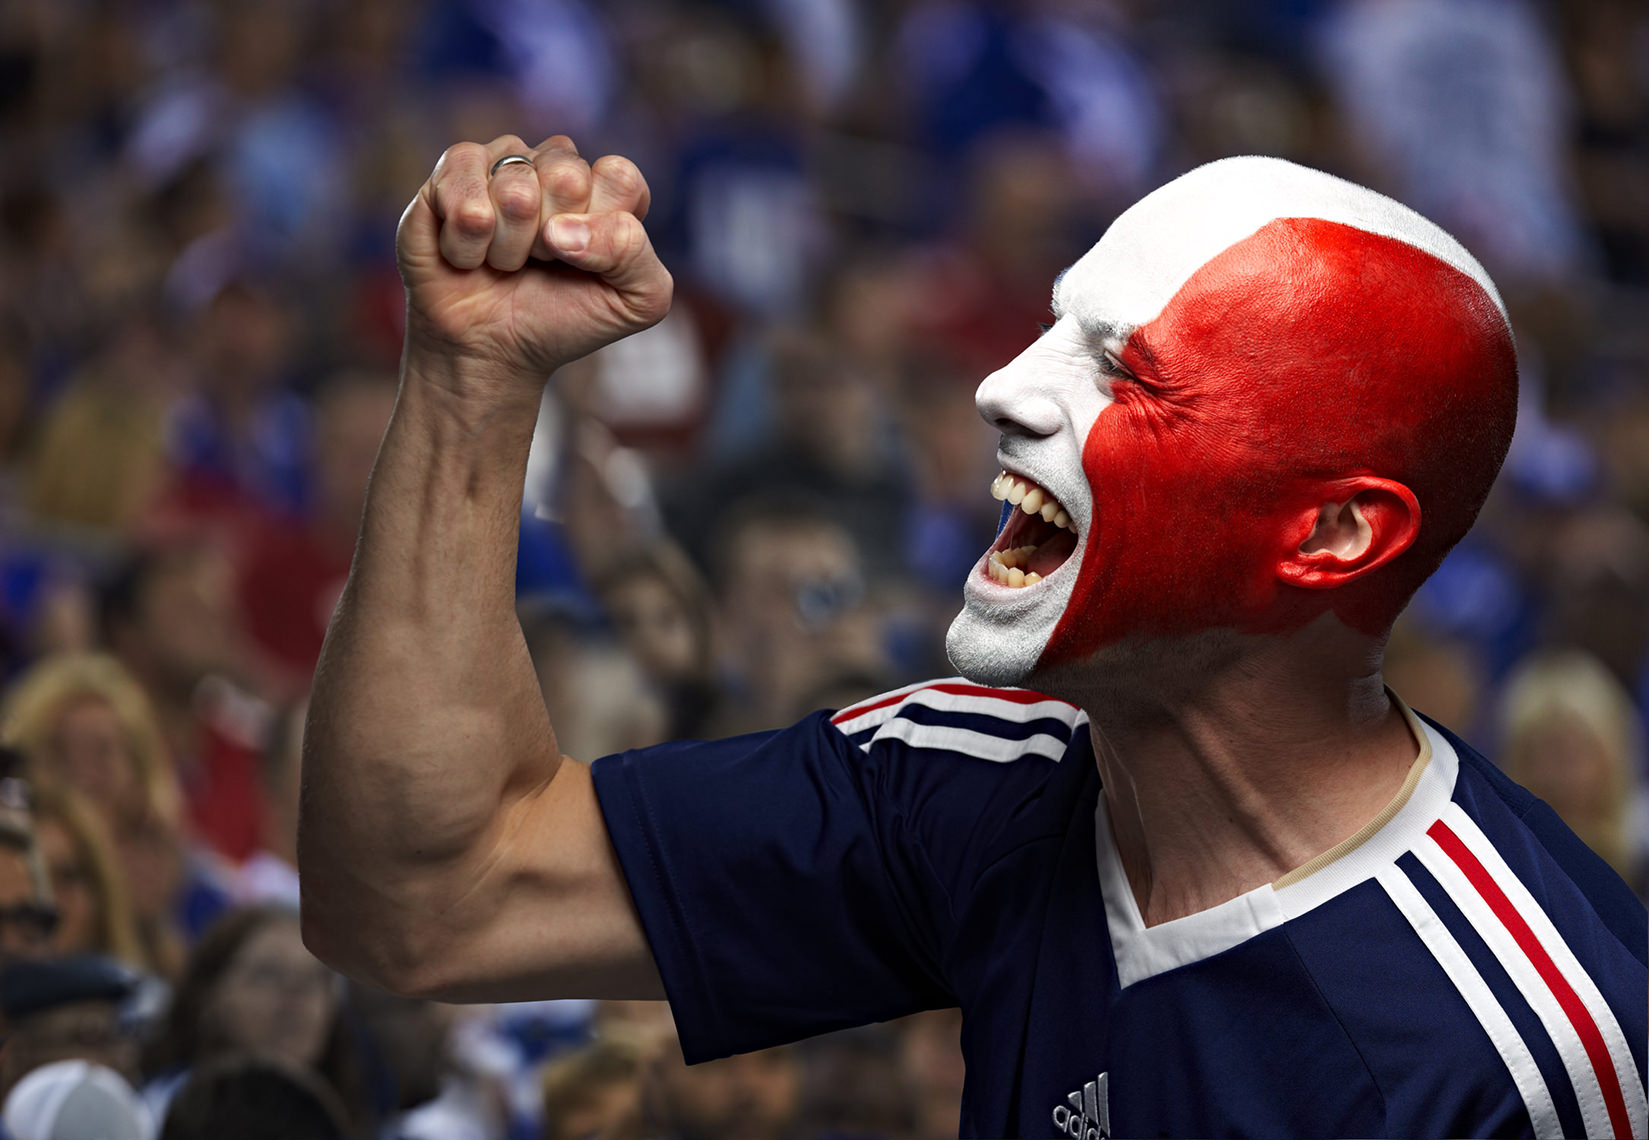 French Football soccer fan face paint photo by Monte Isom